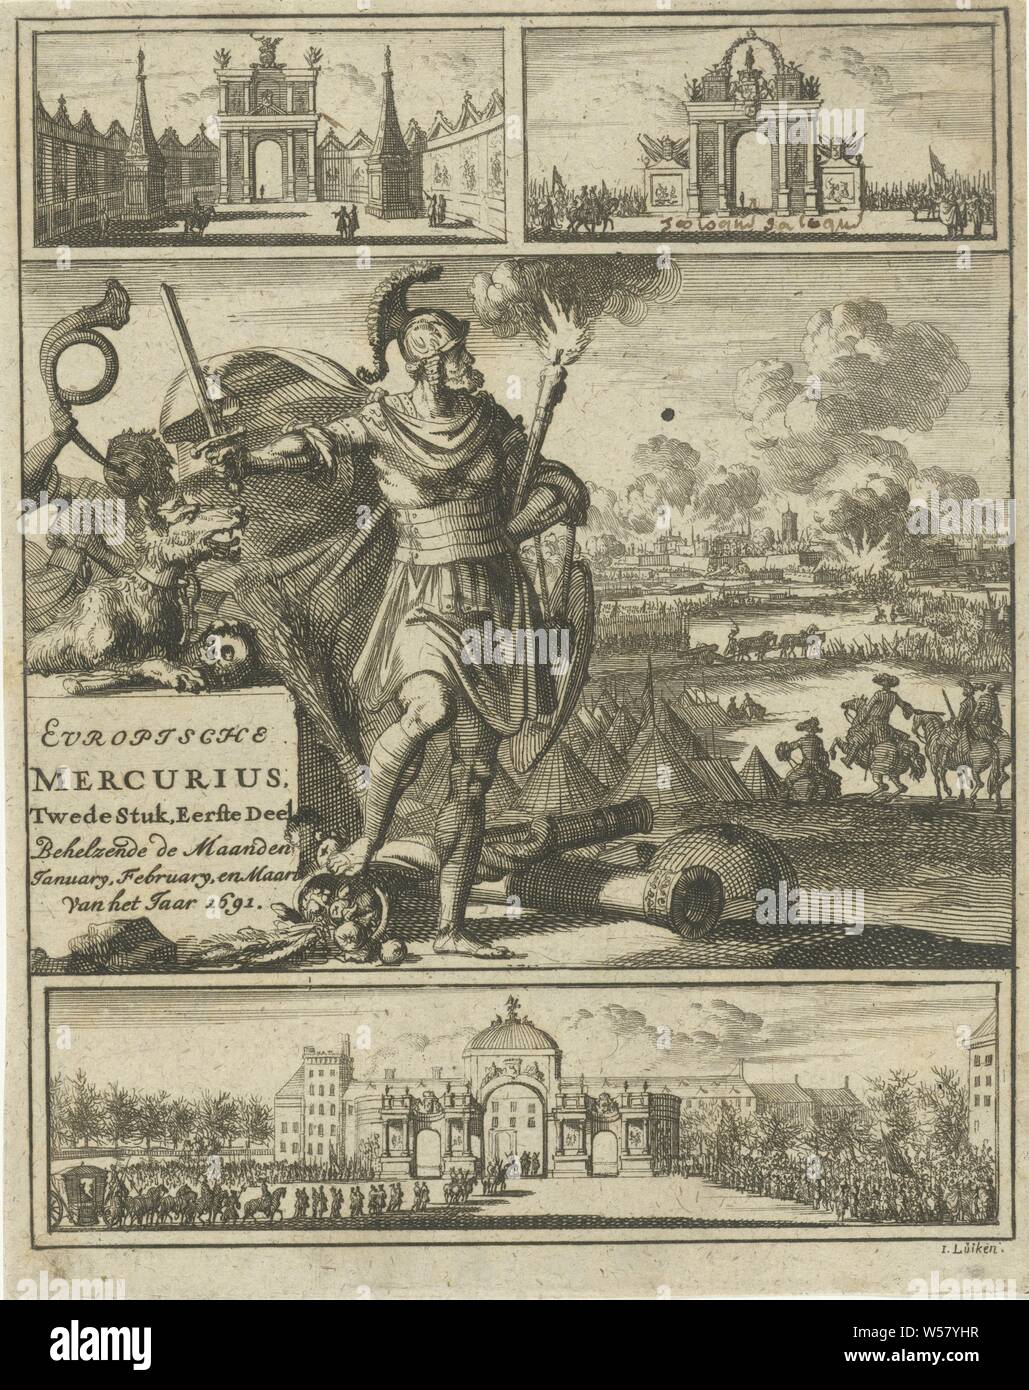 Mars with raised sword in front of a city fired Title page for: European Mercury, Second Piece, First Part: Covering the Months, January, February and March of the Year 1691, Mars with raised sword for a fired city. Above this representation the representation of the triumphal gates on the Grote Markt and the Plaats, prepared for the entry of King William III to The Hague. Under the triumphal gate at the Buitenhof in The Hague, (story of) Mars (Ares), triumphal arch, Grote Markt, Buitenhof, Jan Luyken (mentioned on object), Amsterdam, 1691, paper, etching, h 172 mm × w 136 mm Stock Photo